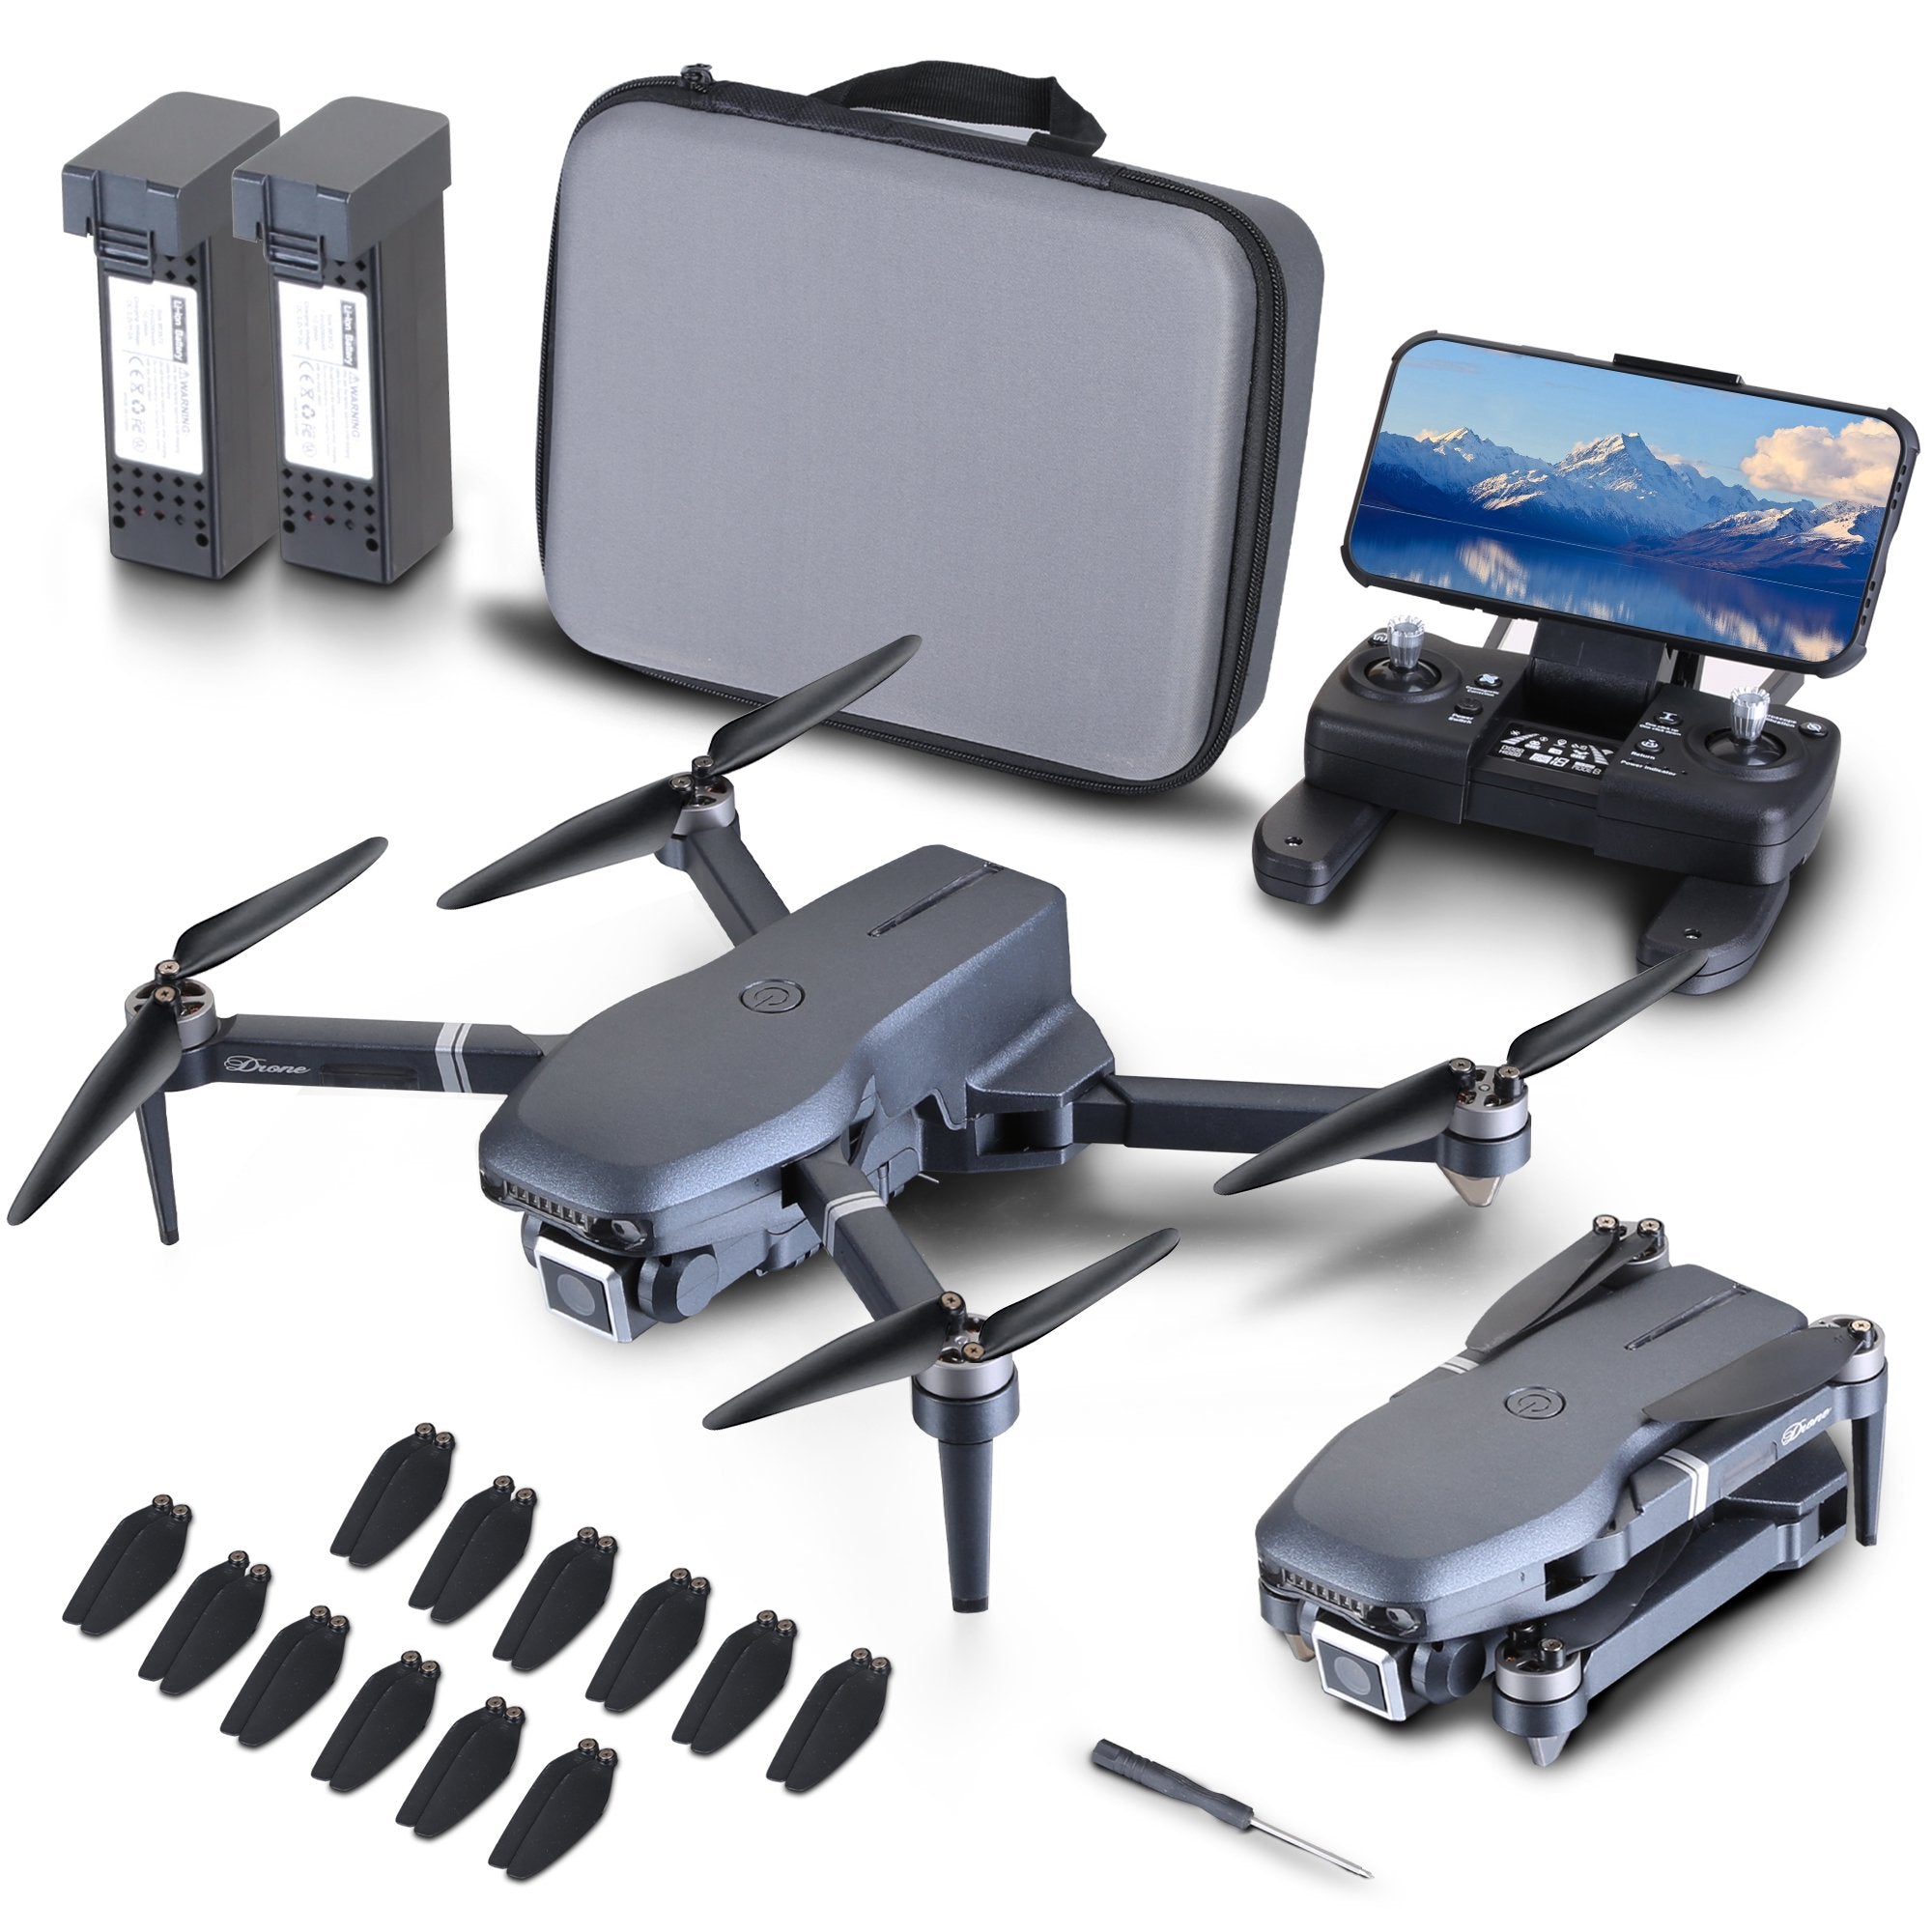 NMY 4K Camera Drones for Adults - GPS, Long Range, 5G FPV, Auto Return Home